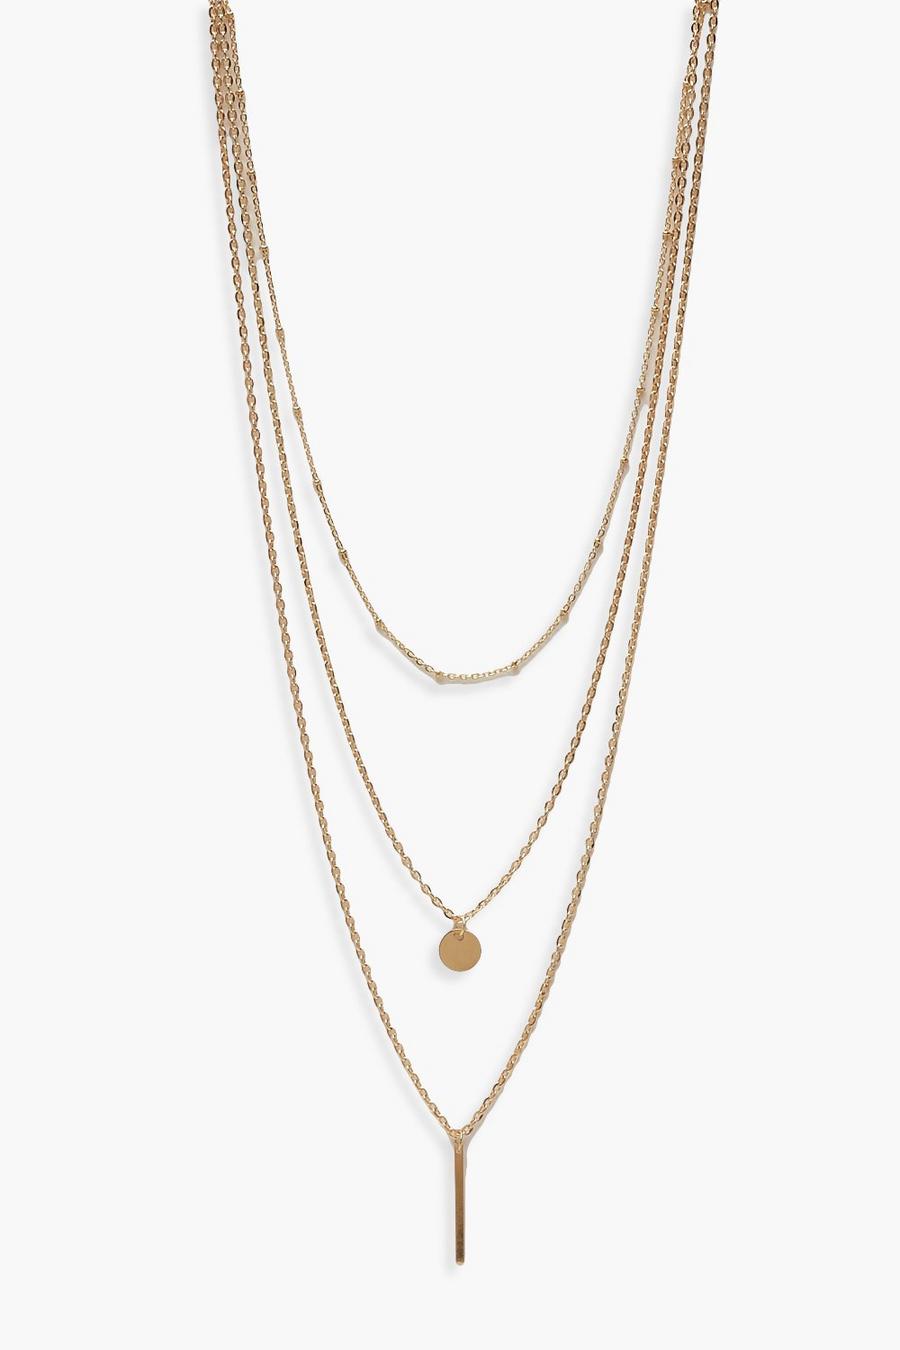 Gold metallizzato Plus Bar + Coin Layered Choker Necklace